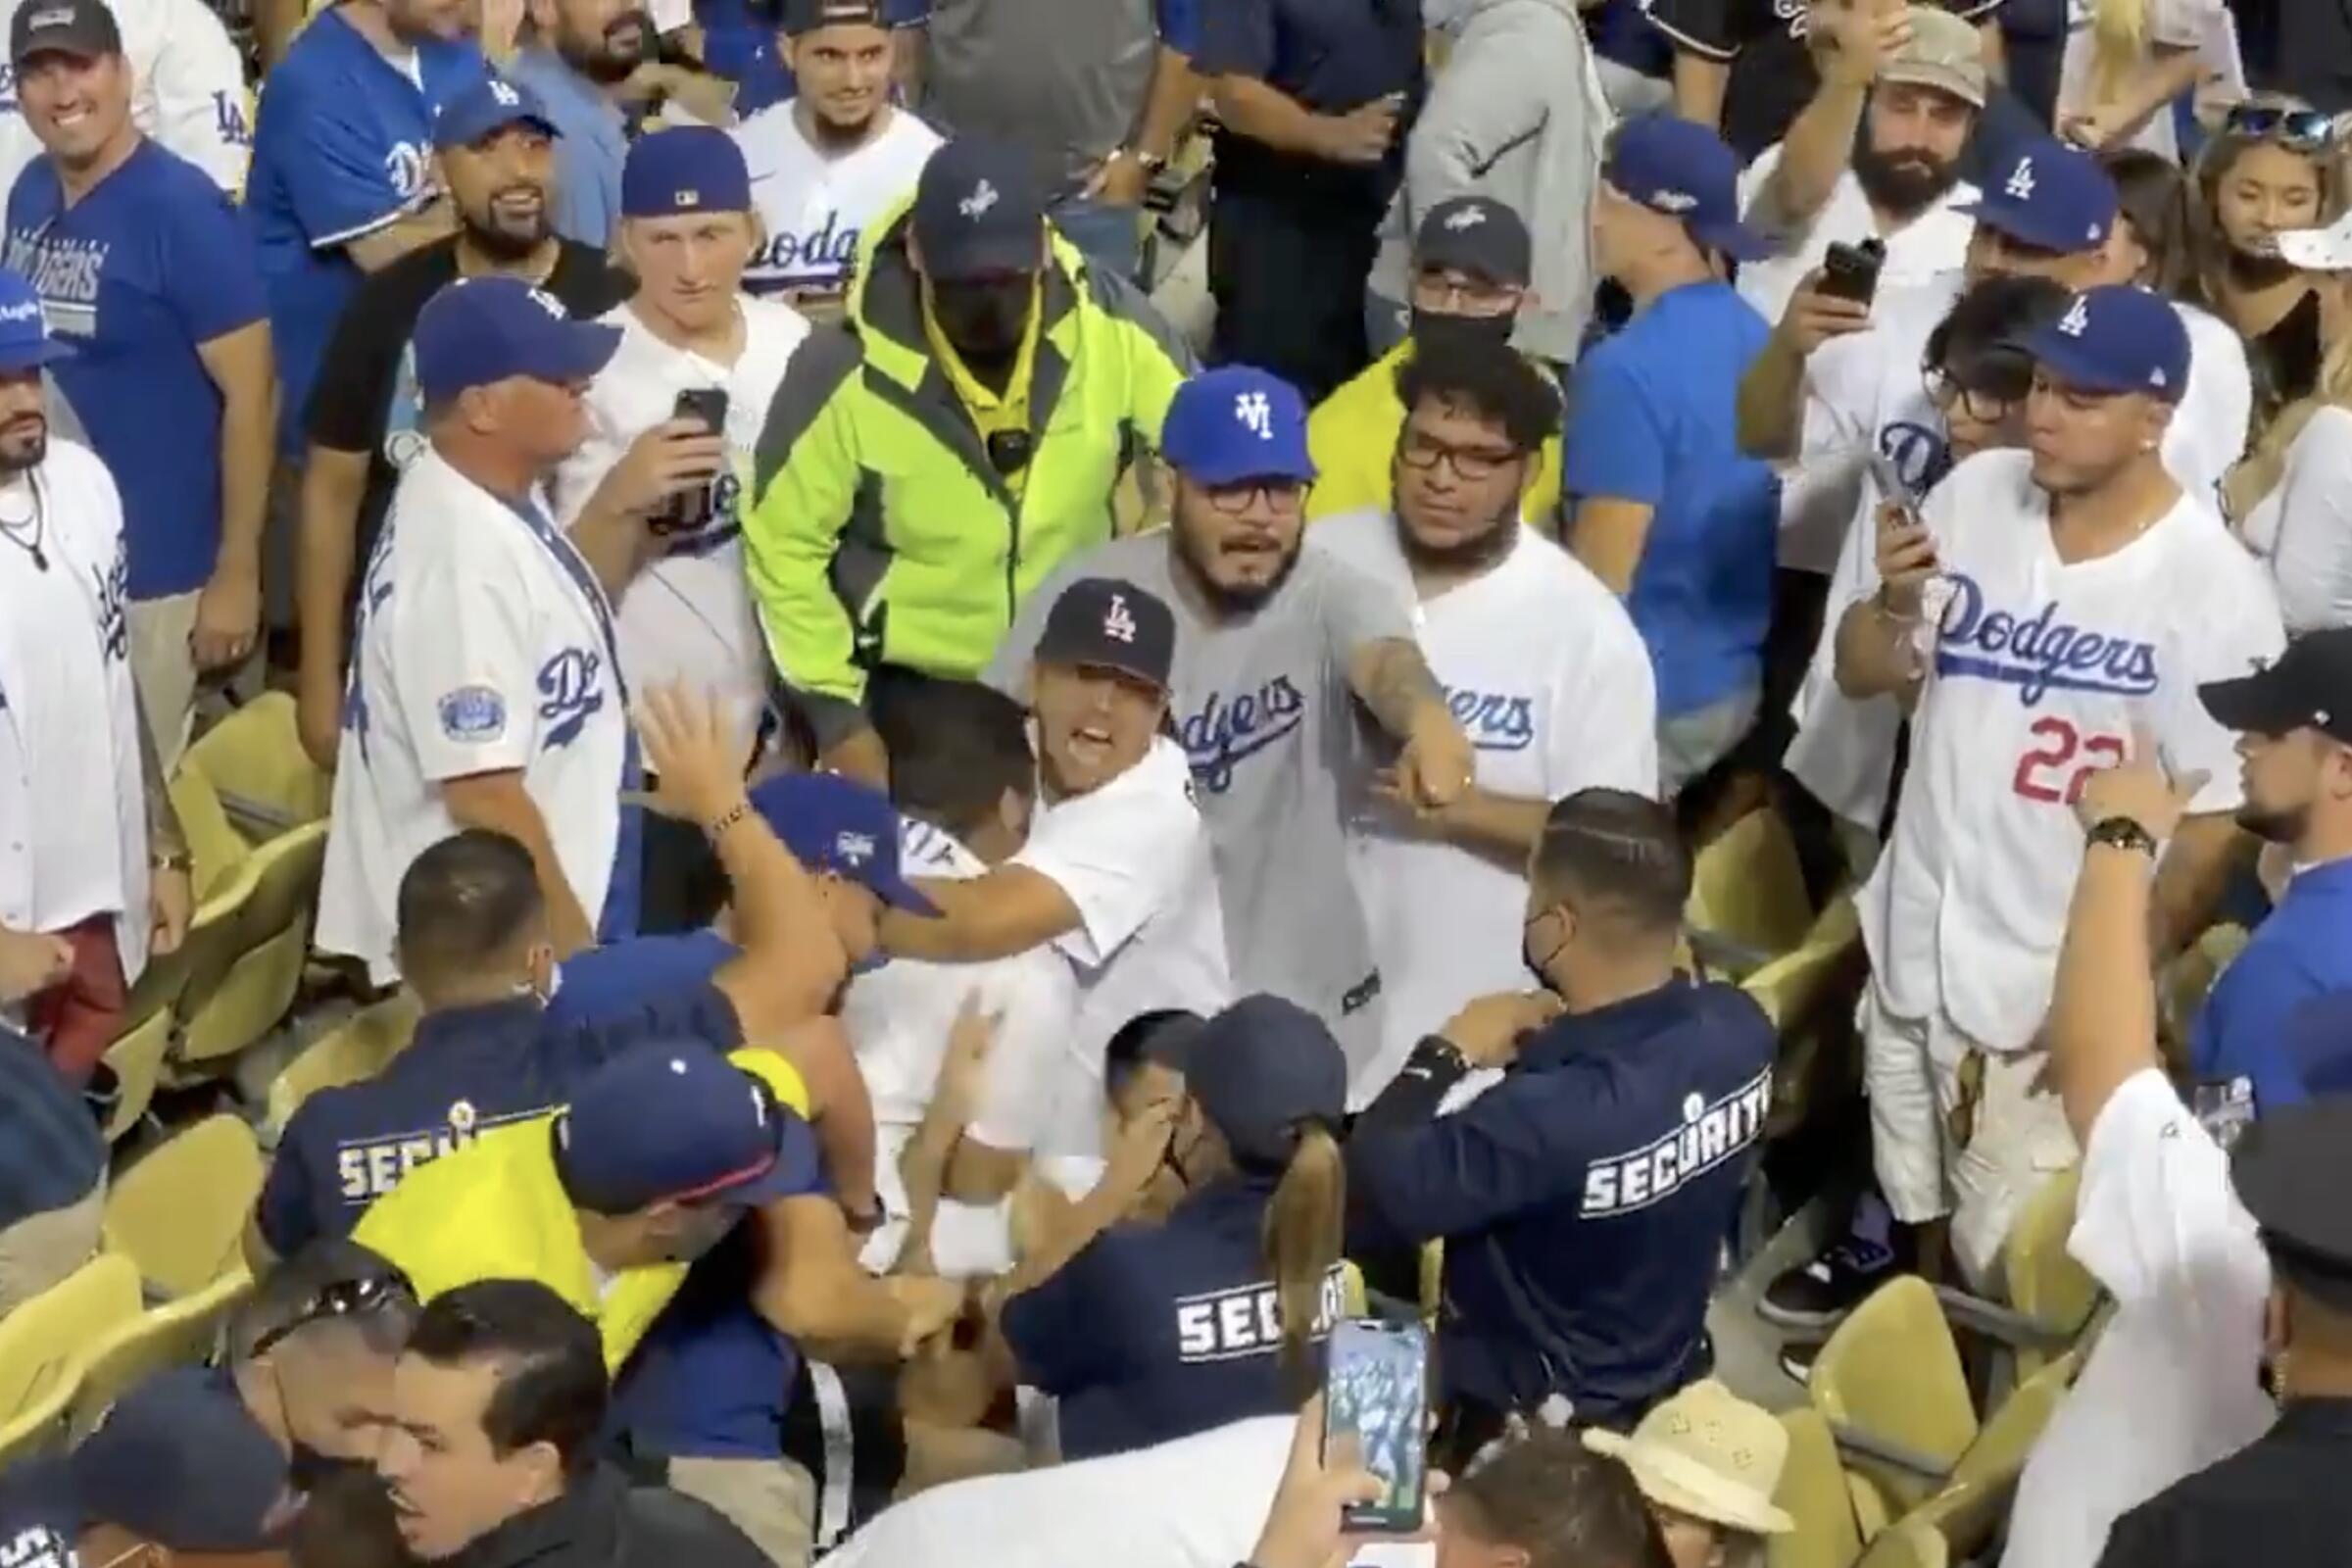 Fight in the crowd at Dodger Stadium on Aug. 3, 2021. Courtesy of Jake Reiner